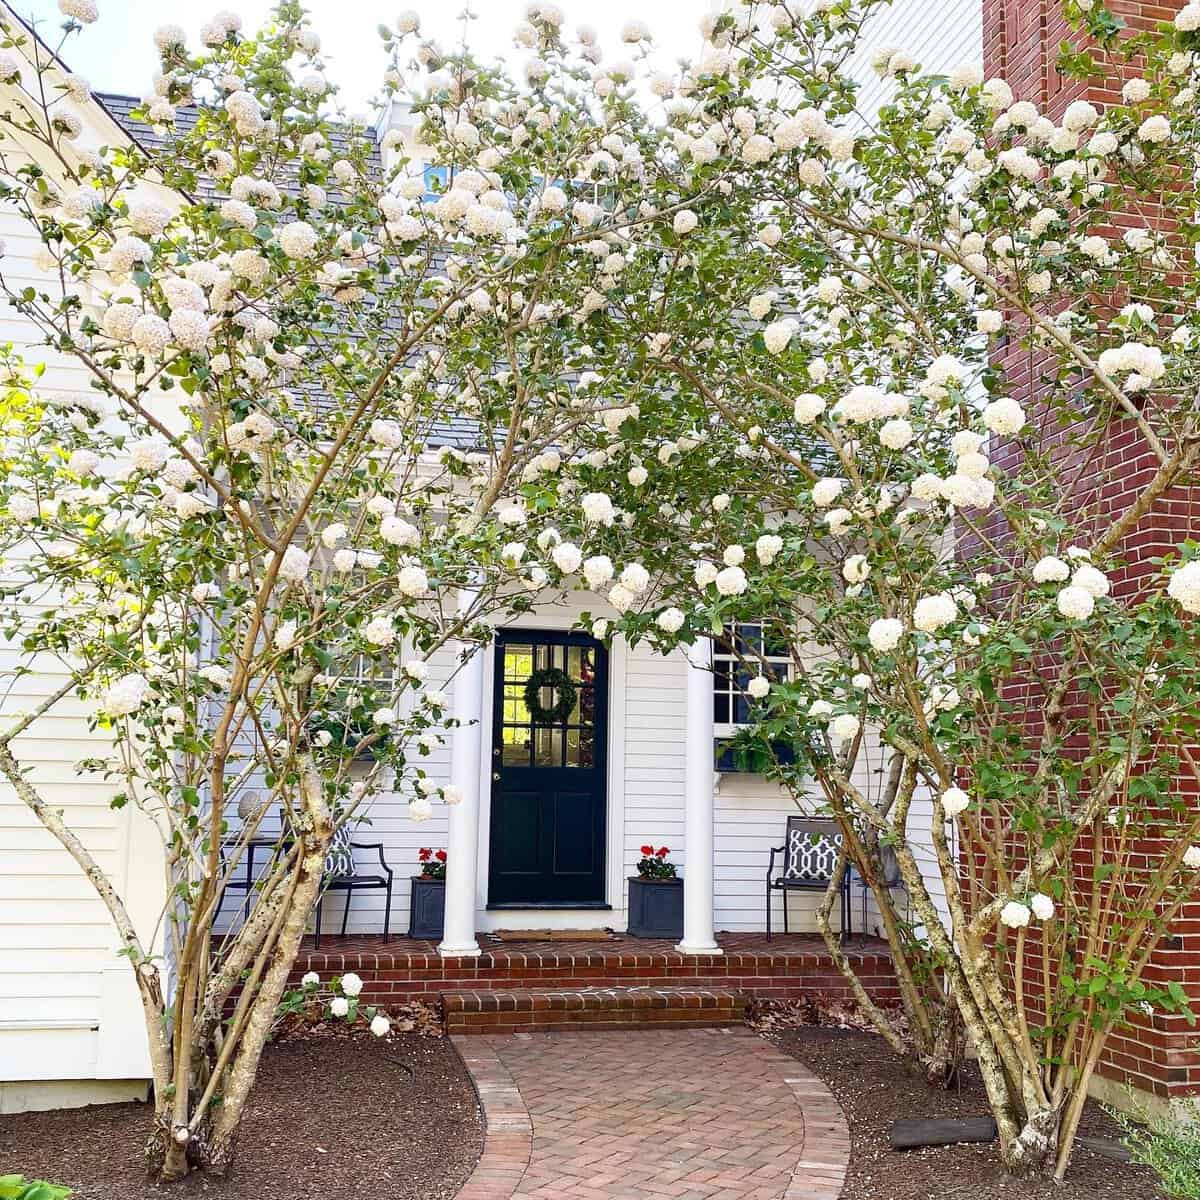 White viburnums in front of a brick house create a natural arbor